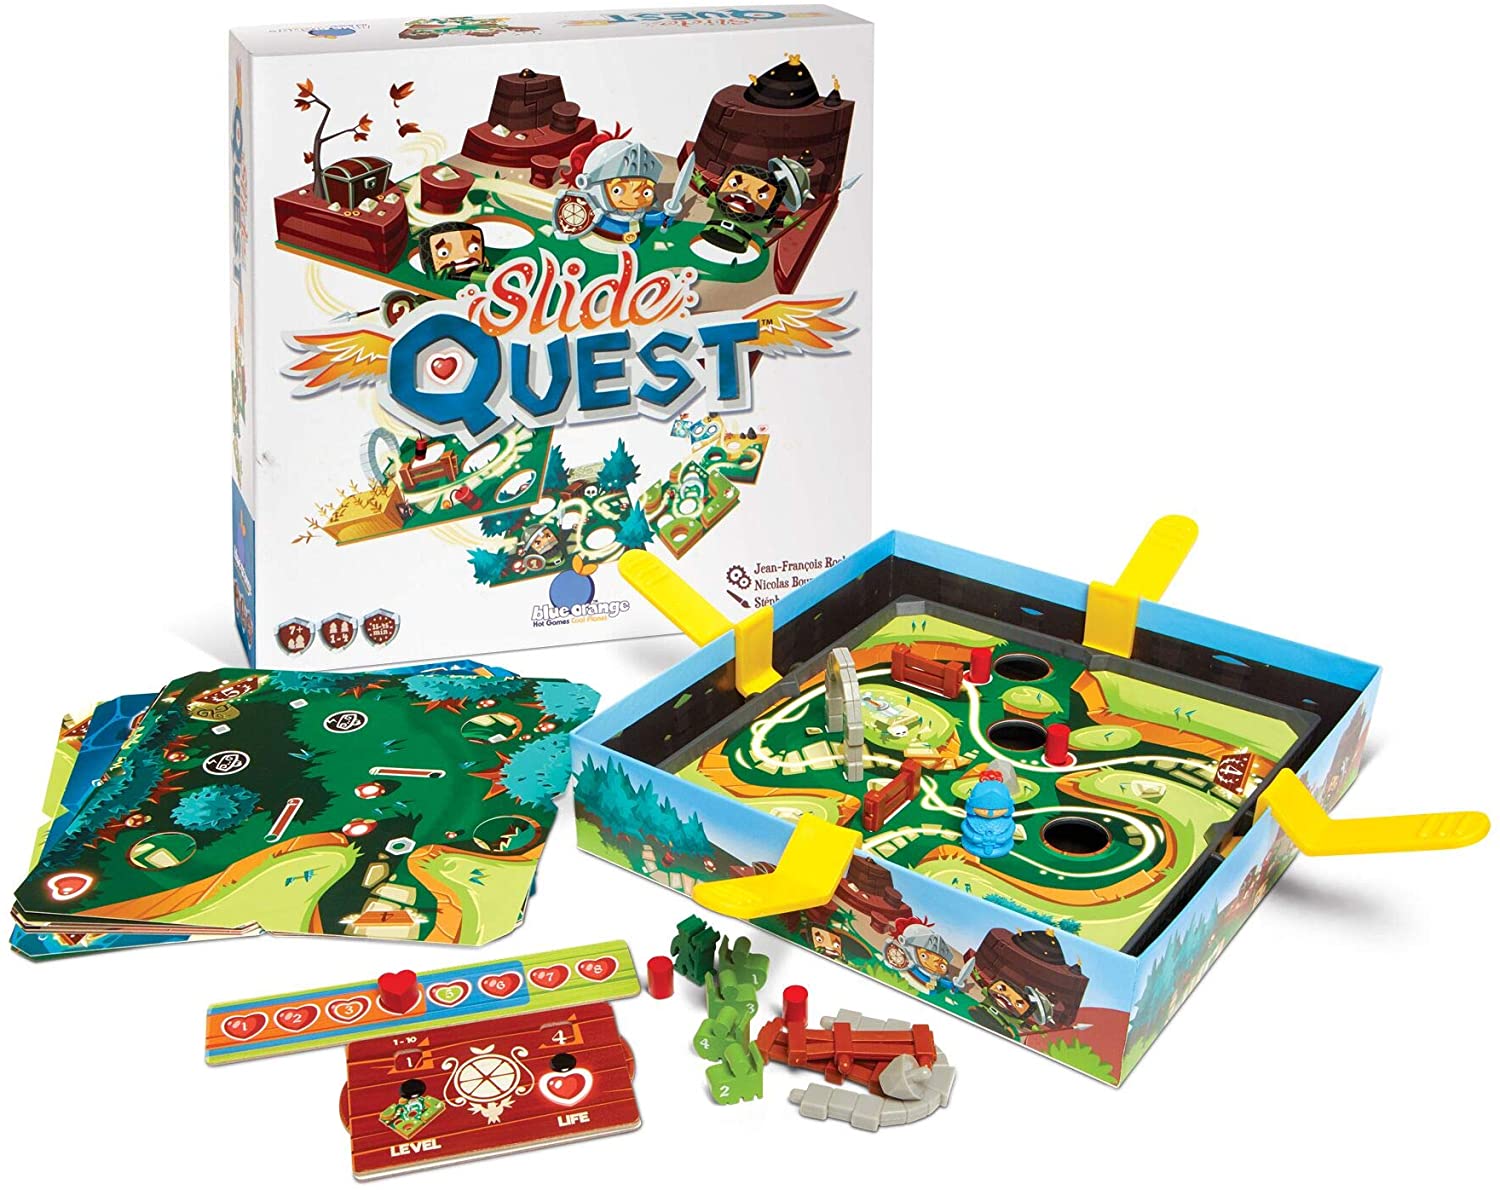 Find out about Slide Quest